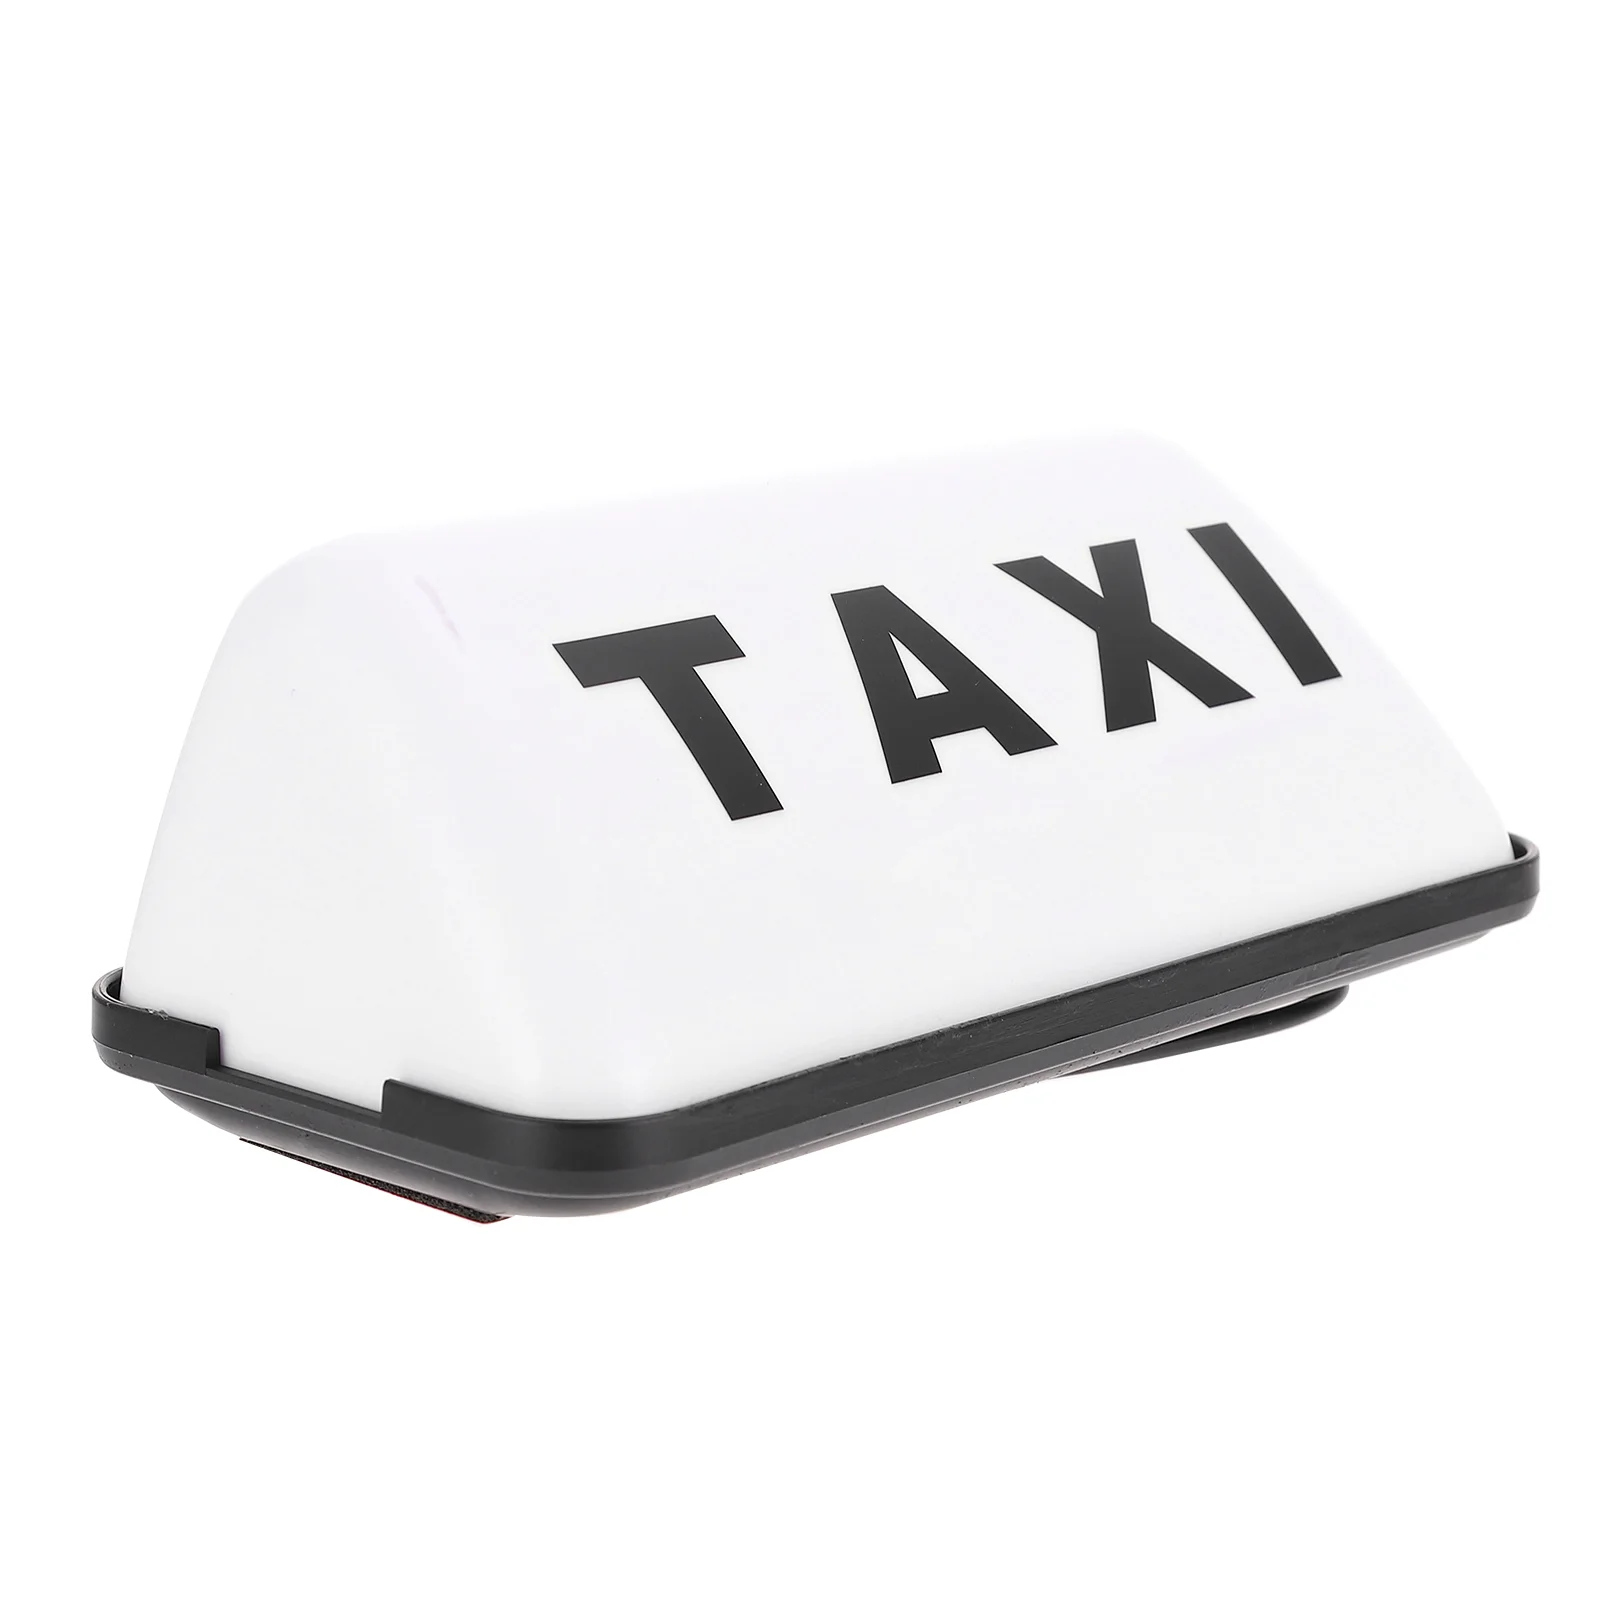 

Taxi Light Sign Led Roof Car Cab Lights Lamp Indicator Signs Illuminated Toppers Dome Topper Up Waterproof Decor Cat